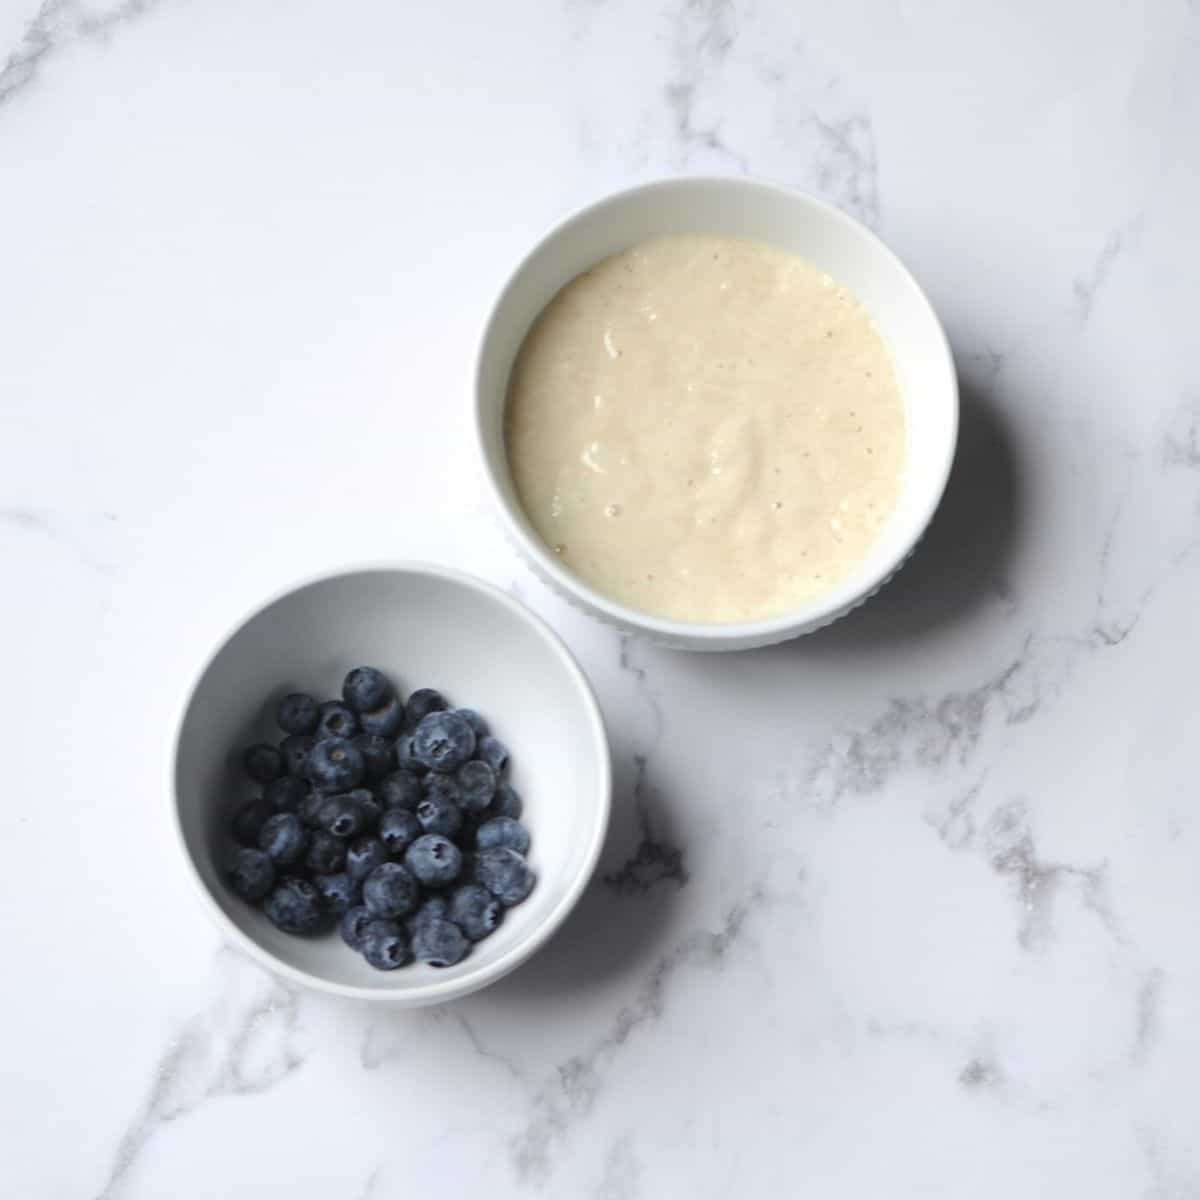 How to Make Sourdough Starter with Blueberries